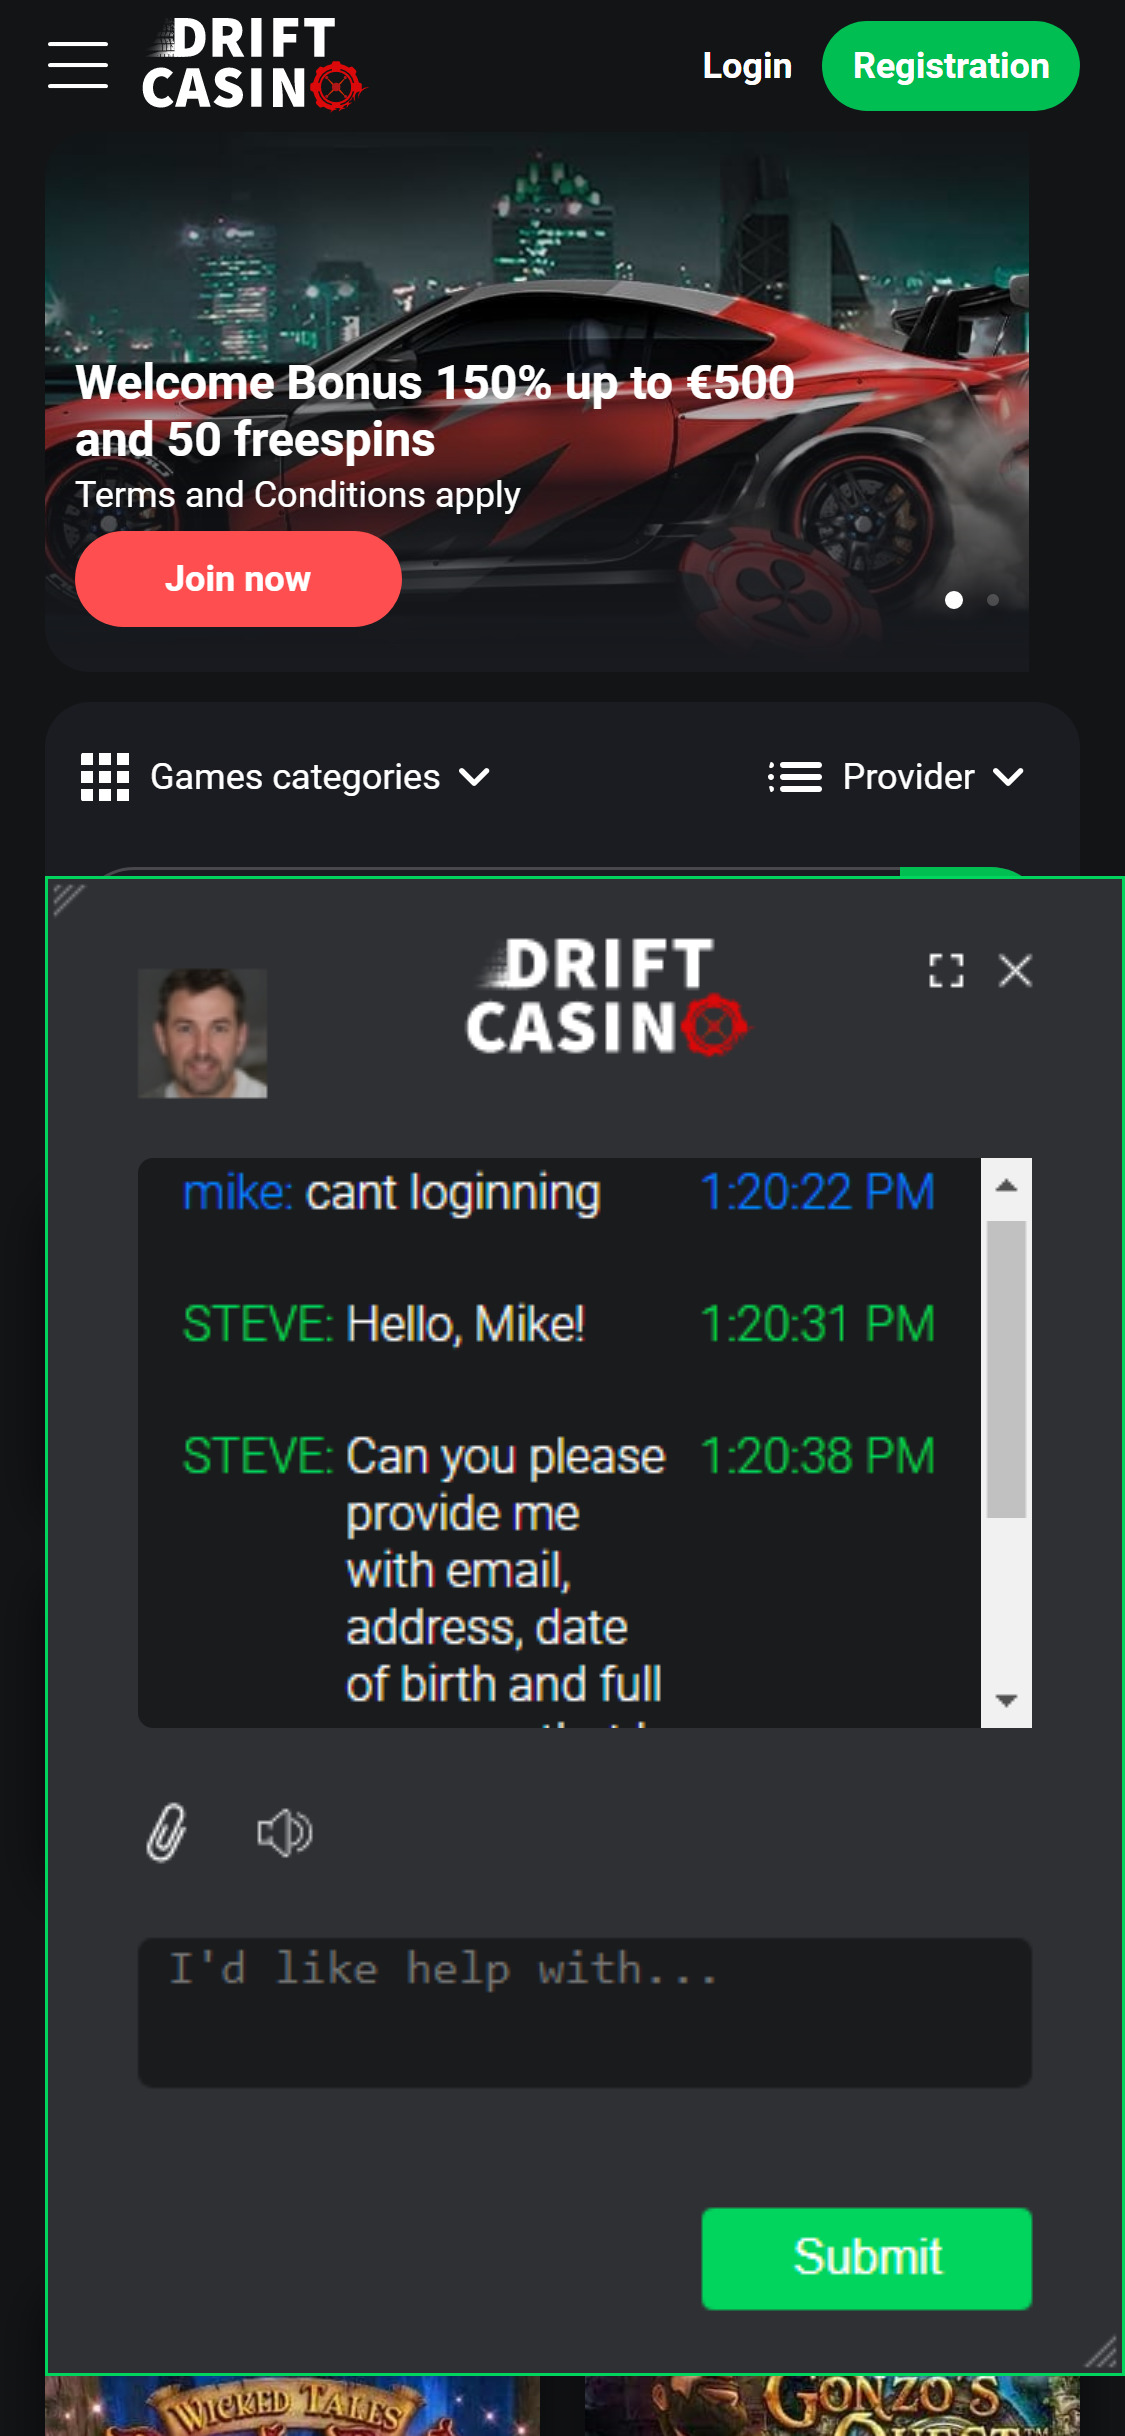 Casino Drift Mobile Support Review